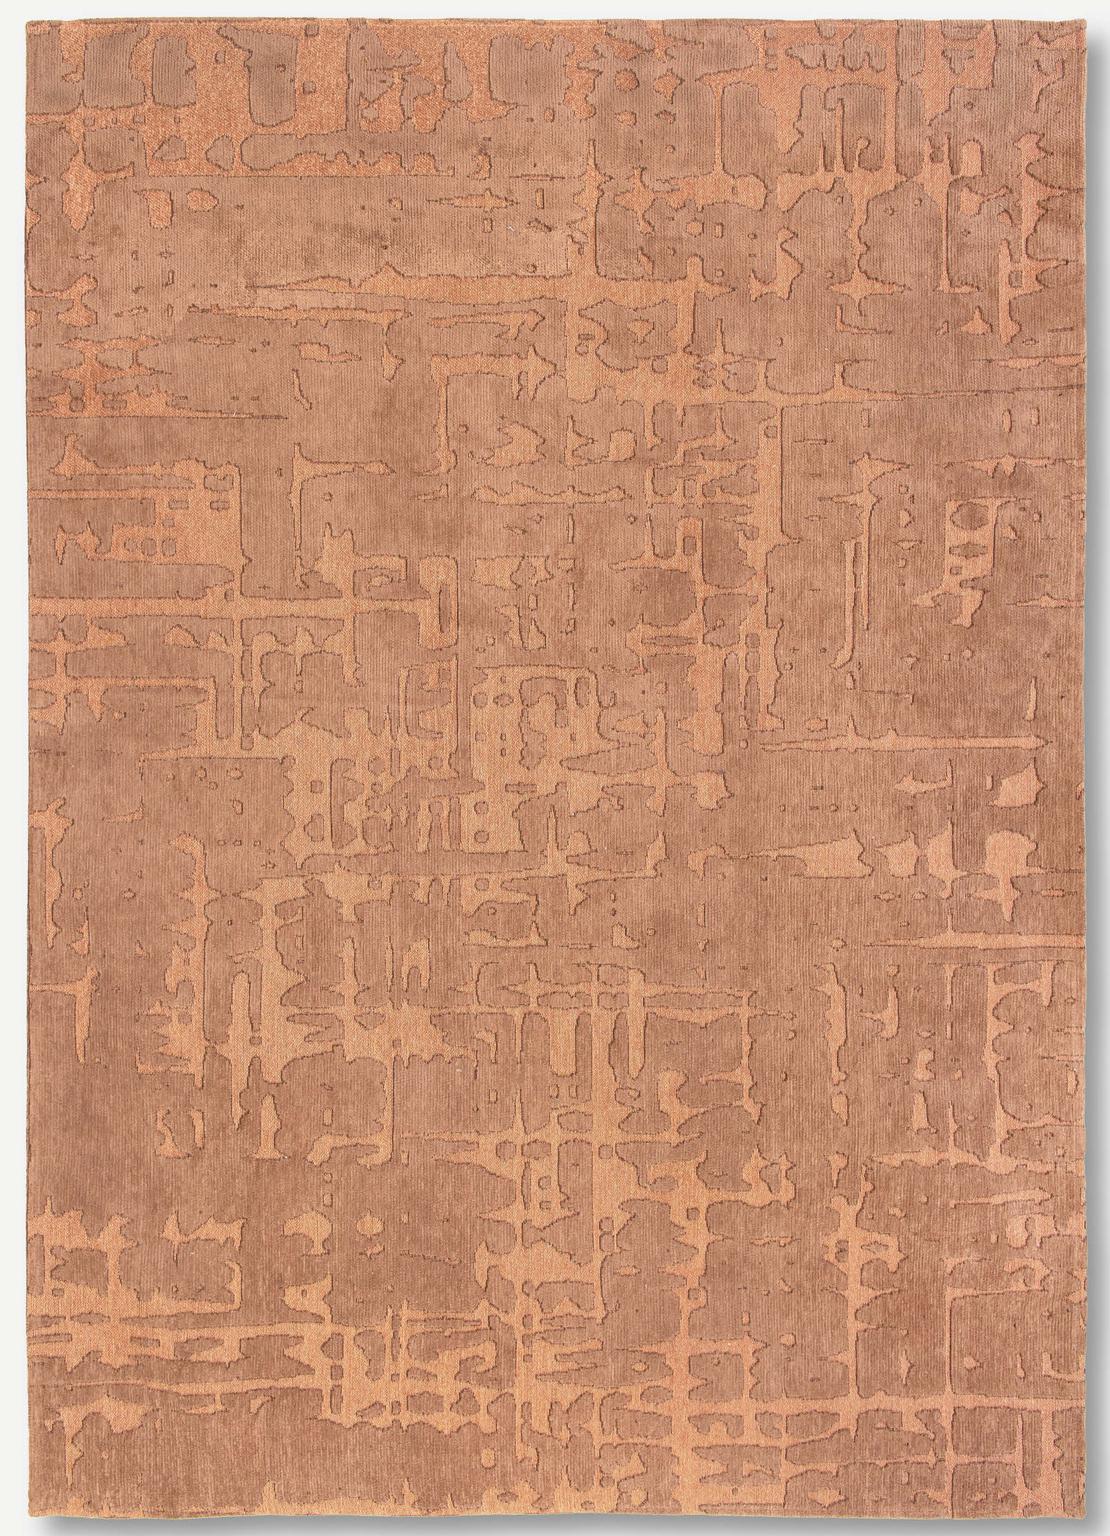 Abstract Brown Belgian Rug ☞ Size: 9' 2" x 13' (280 x 390 cm)